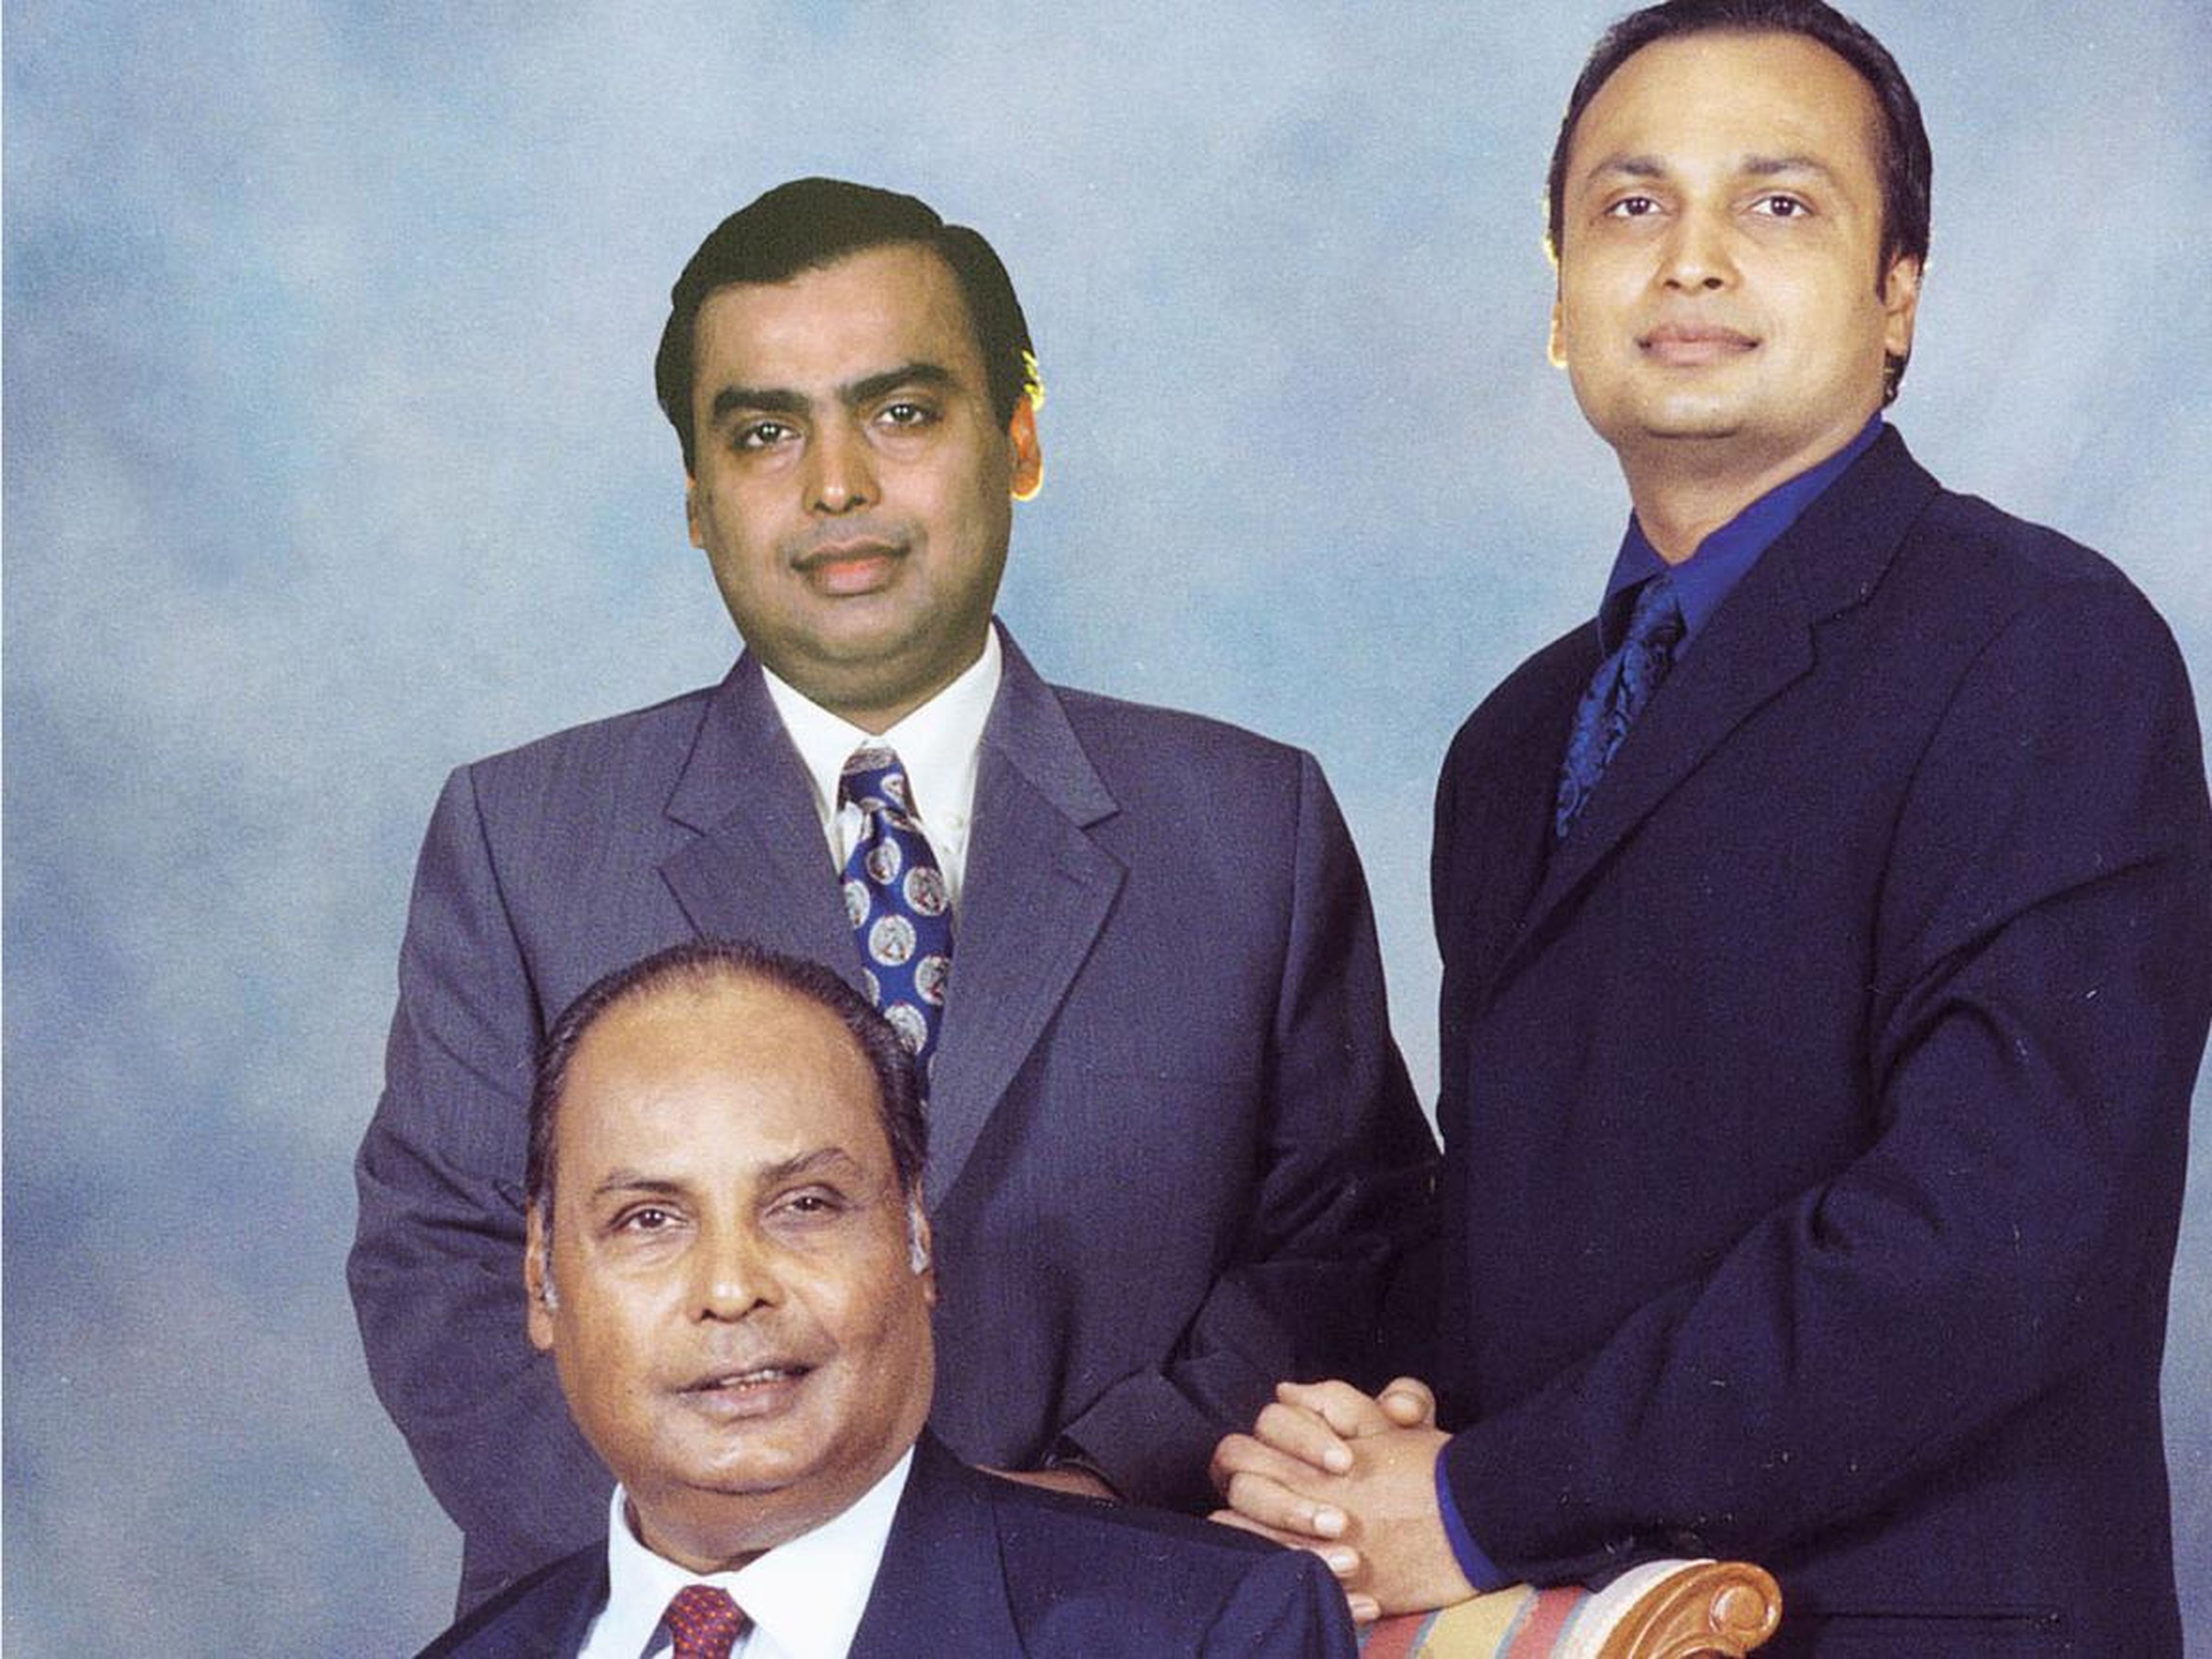 Dhirubhai poses with his sons, Mukesh, left, and Anil, right, in 2000.